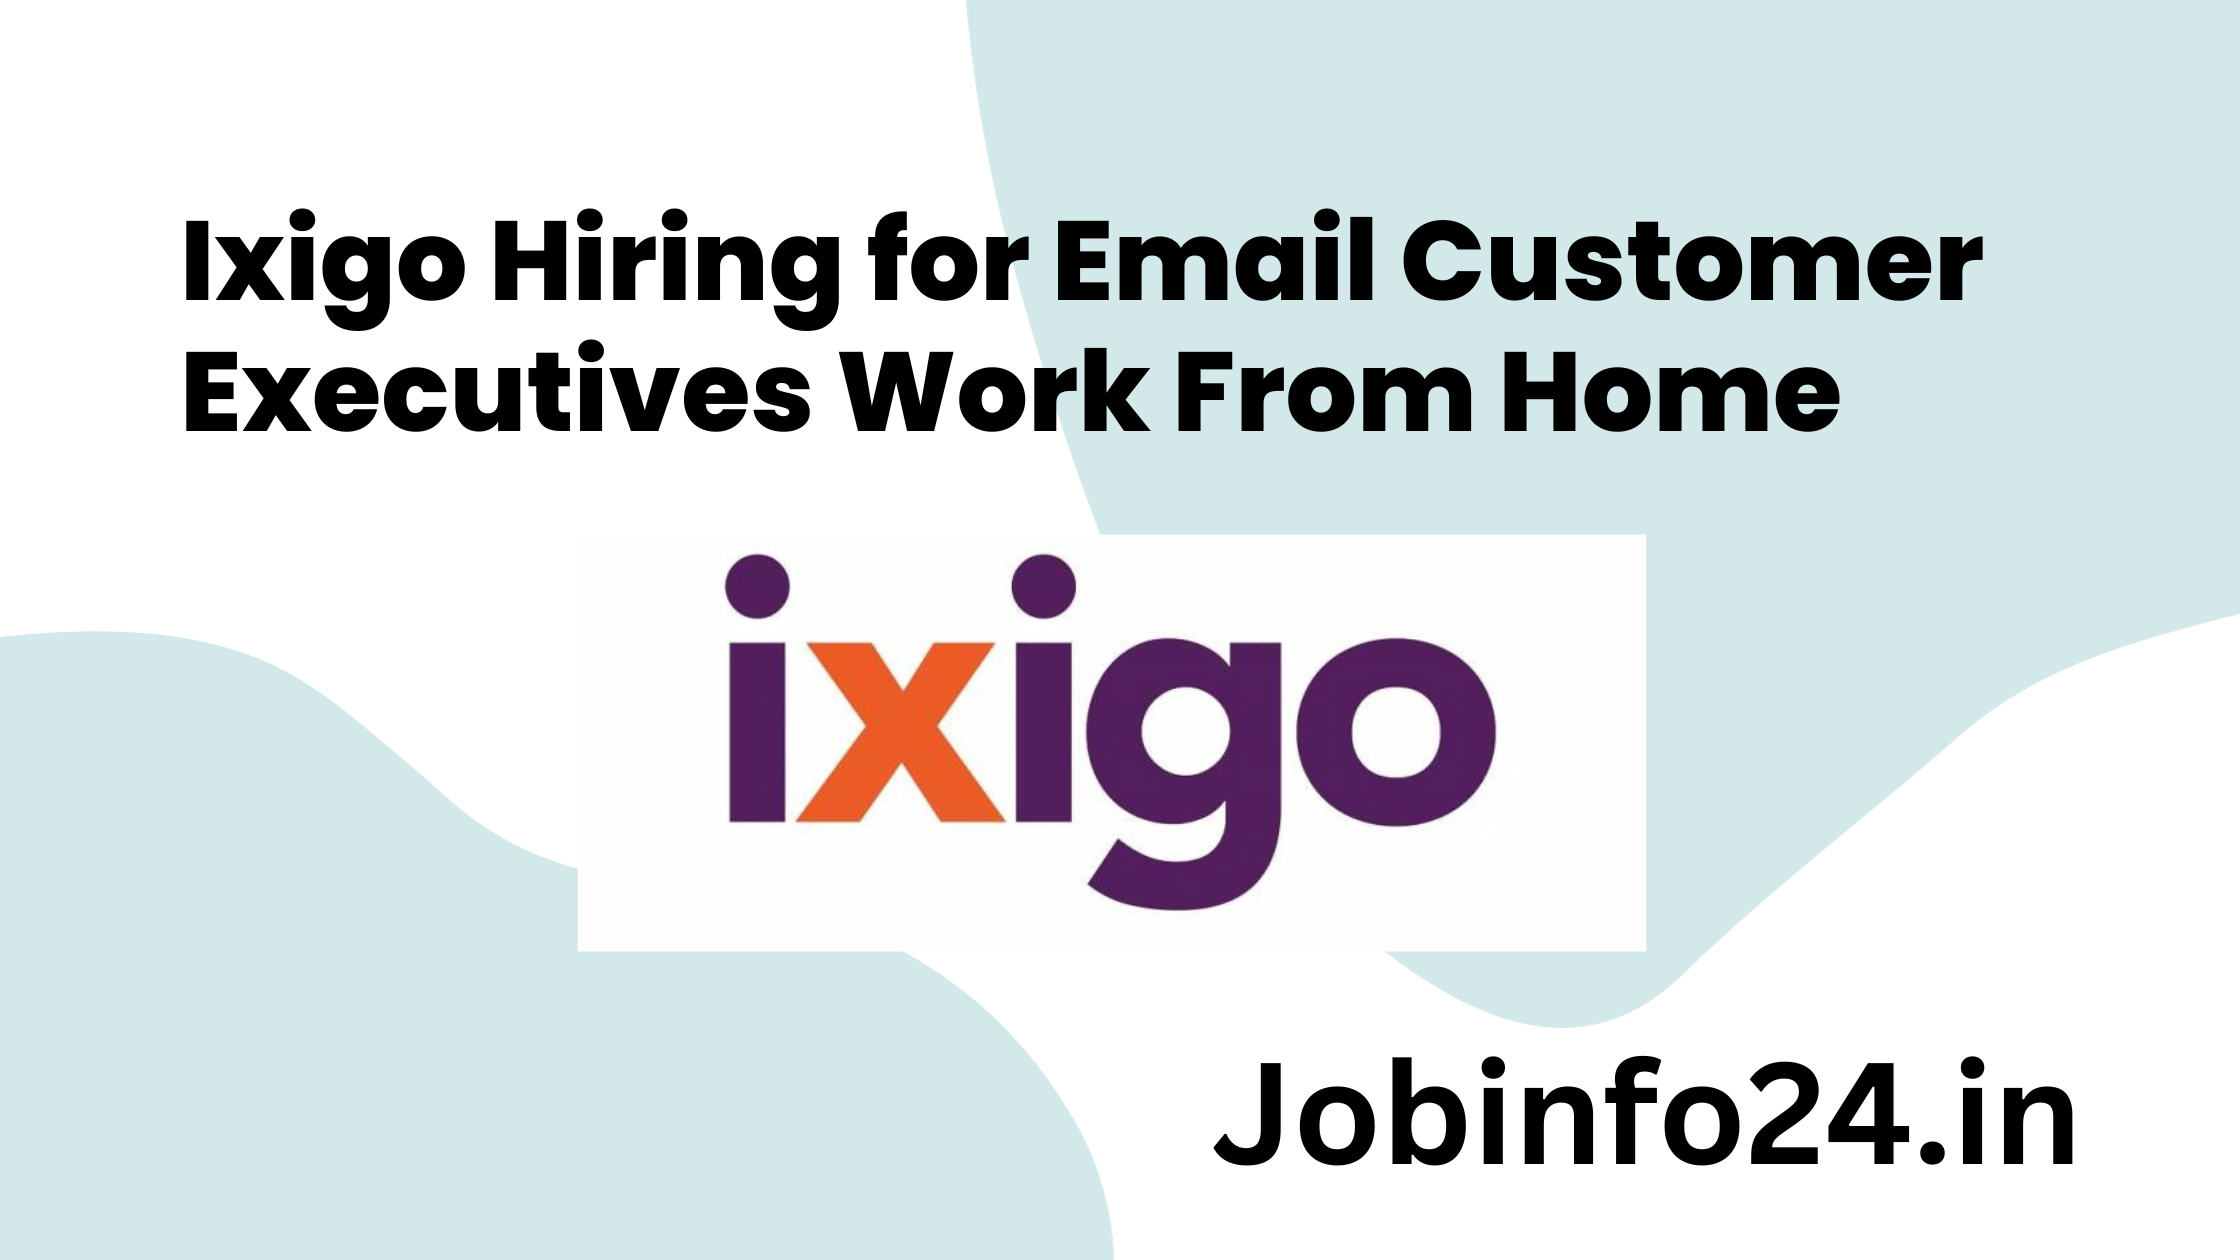 Ixigo Hiring for Email Customer Executives Work From Home